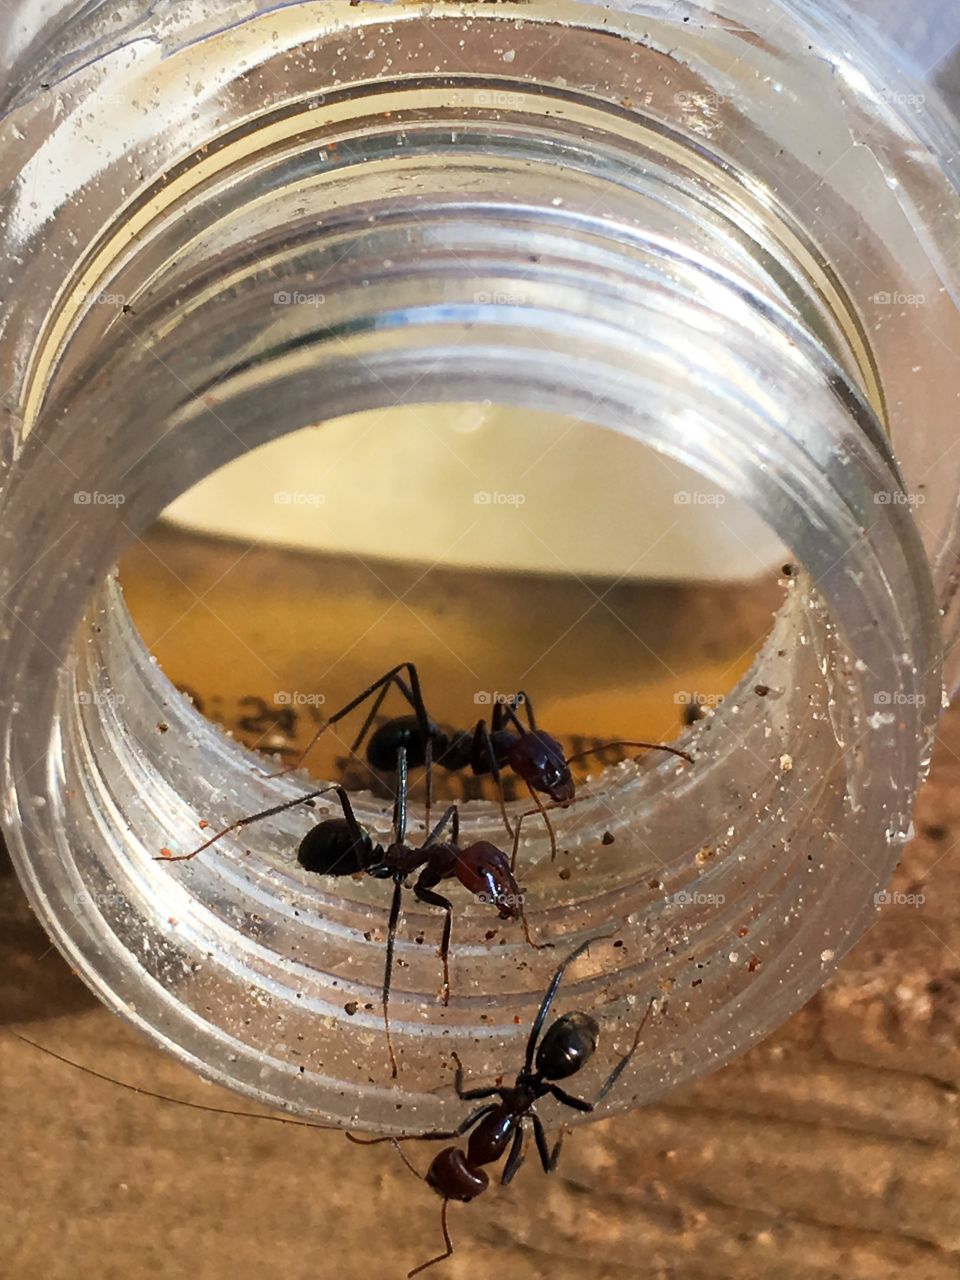 Worker ants crawling inside and outside glass jar on its side 